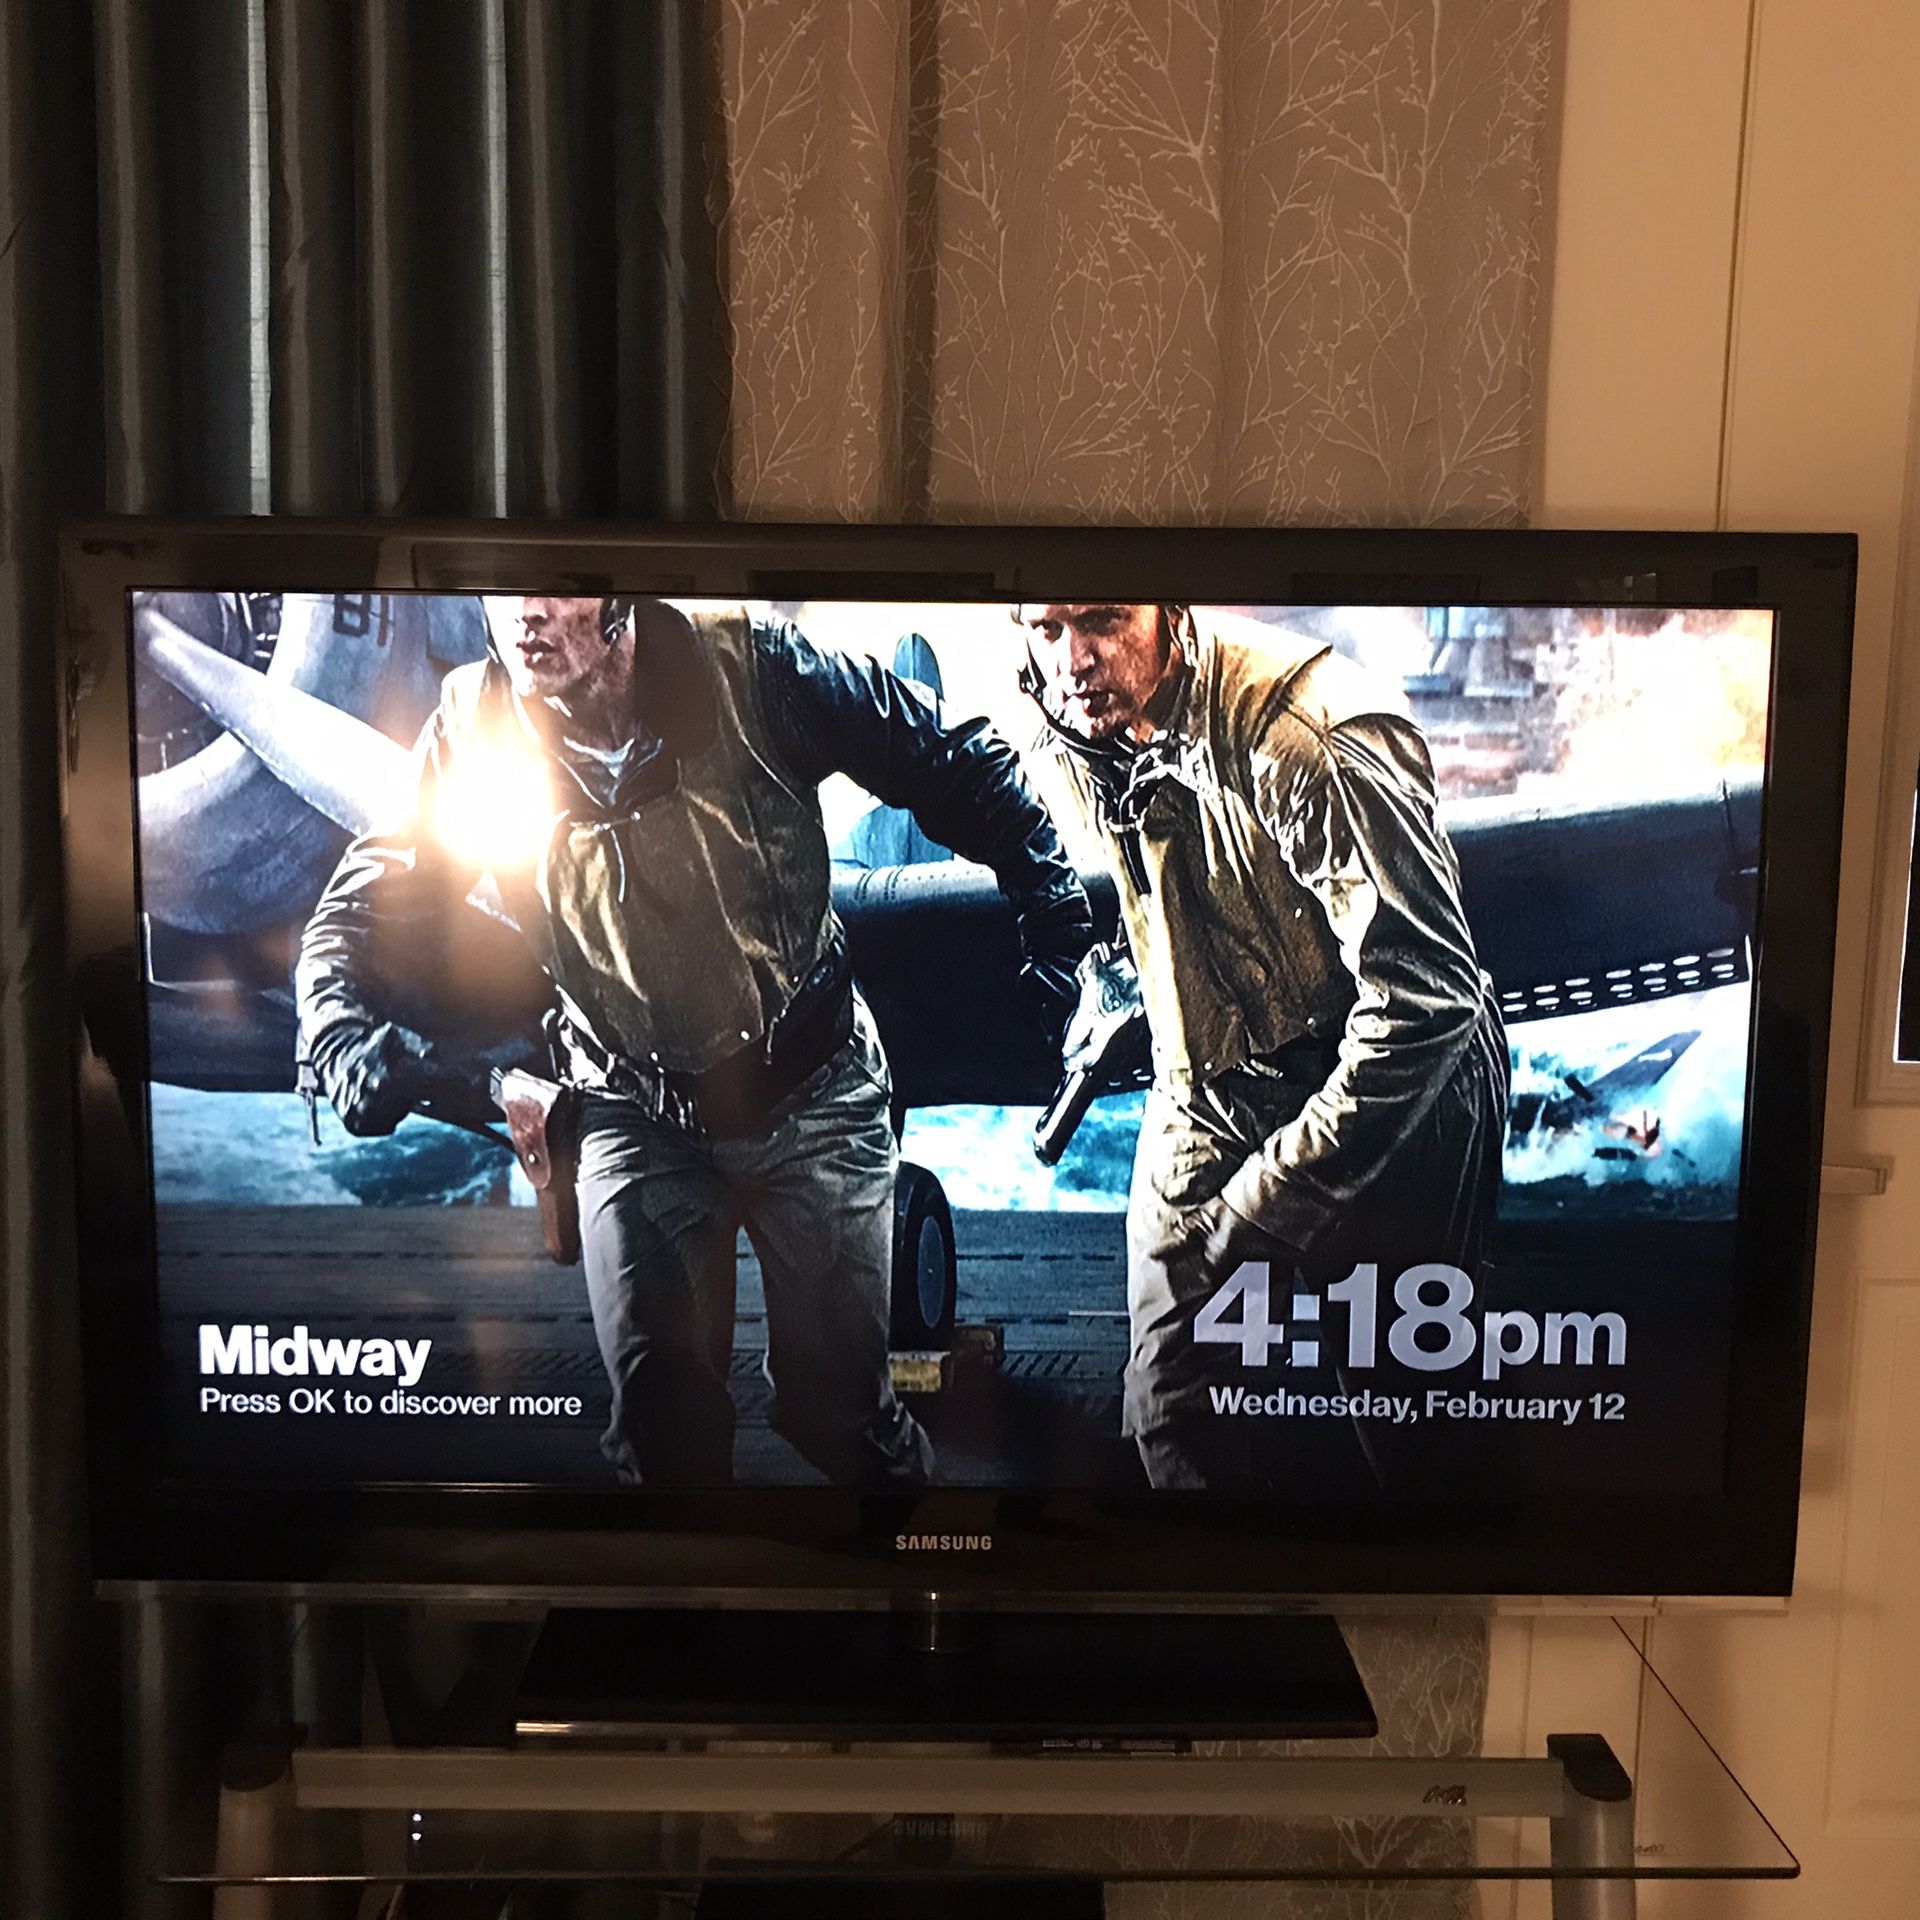 Samsung 55” TV will sell with TV stand